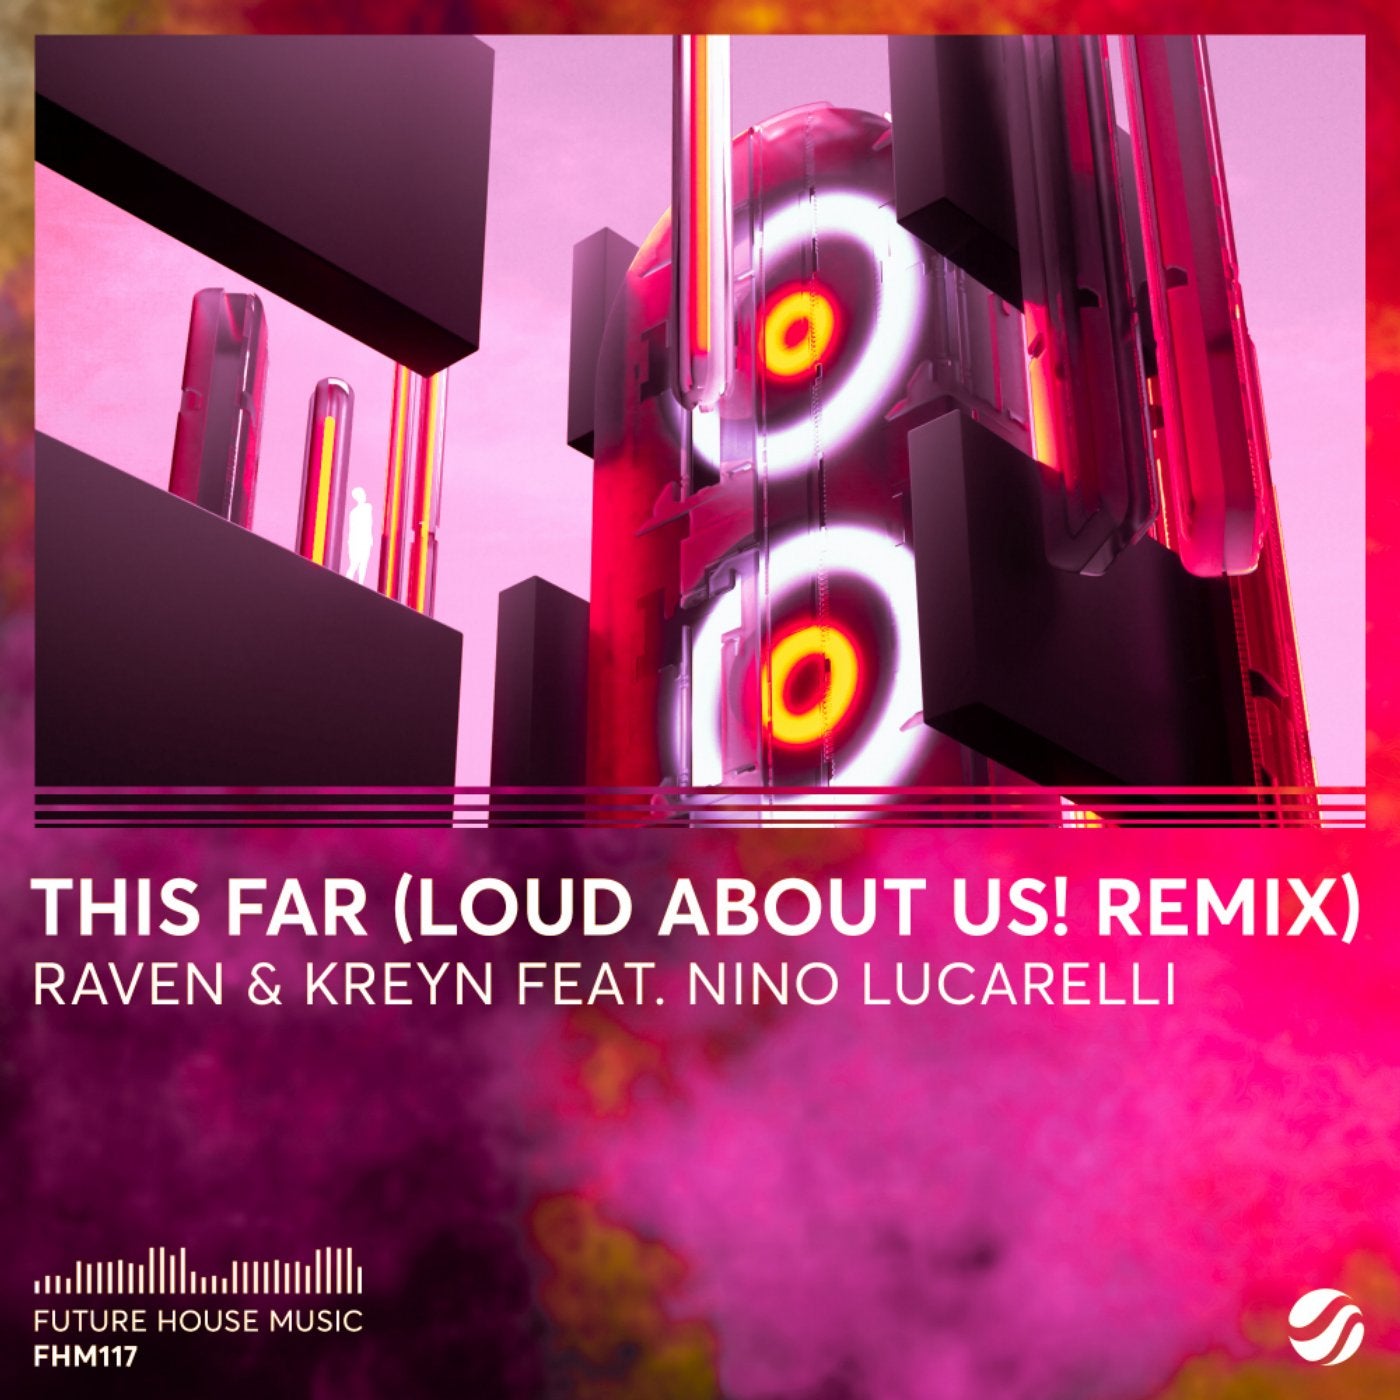 This Far (LOUD ABOUT US! Remix)